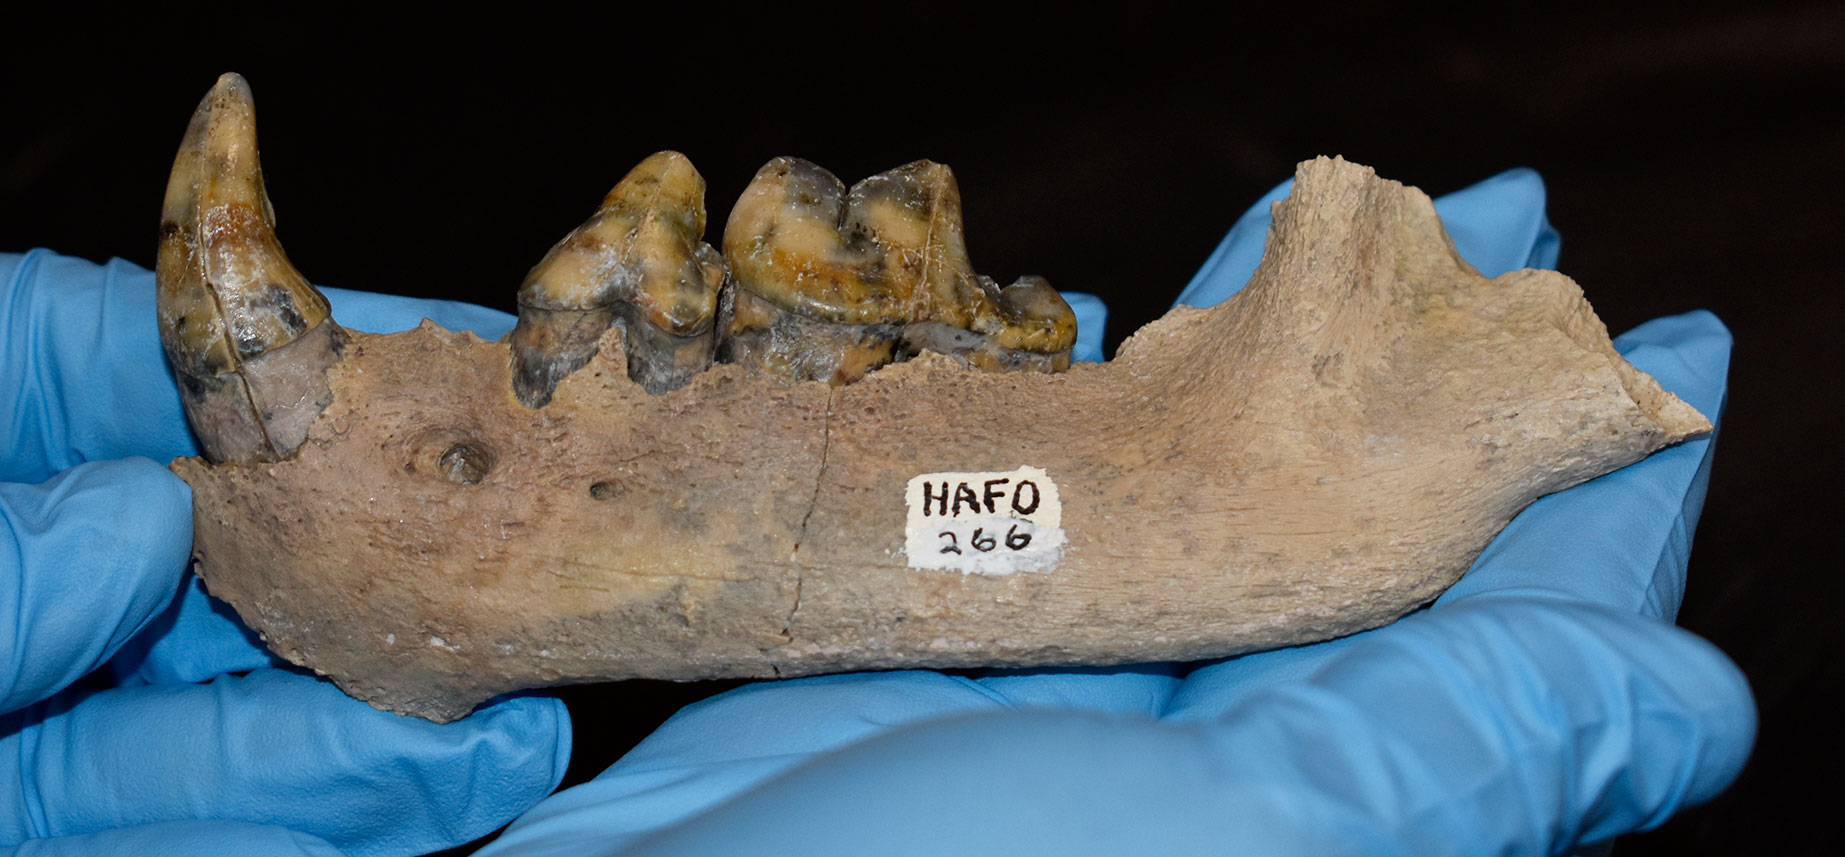 Photograph of the lower jaw of a bone-brushing dog from the Pliocene Hagerman Fossil Beds of Idaho. The photo shows one half of a lower jaw with a long, pointed canine tooth and two molars. The jaw is held by someone wearing blue gloves with two hands. The jaw is light brown in color.